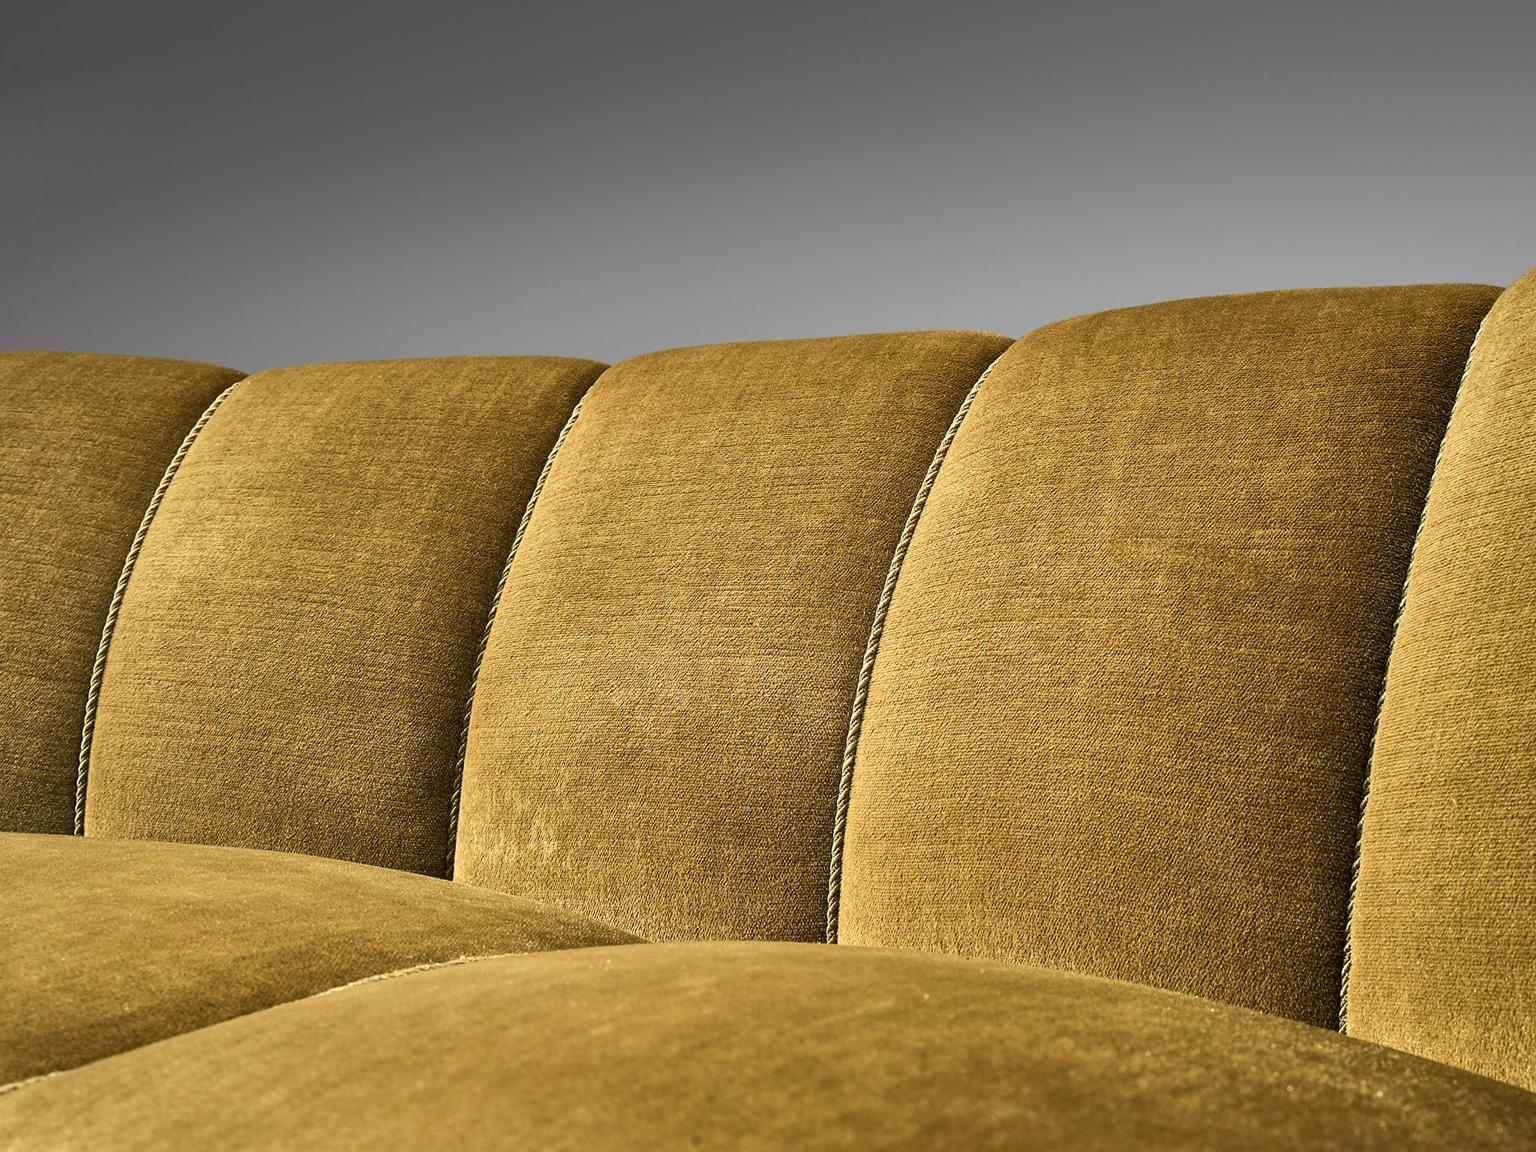 Mid-Century Modern French Curved Sofa in Mustard Colored Velvet, 1950s